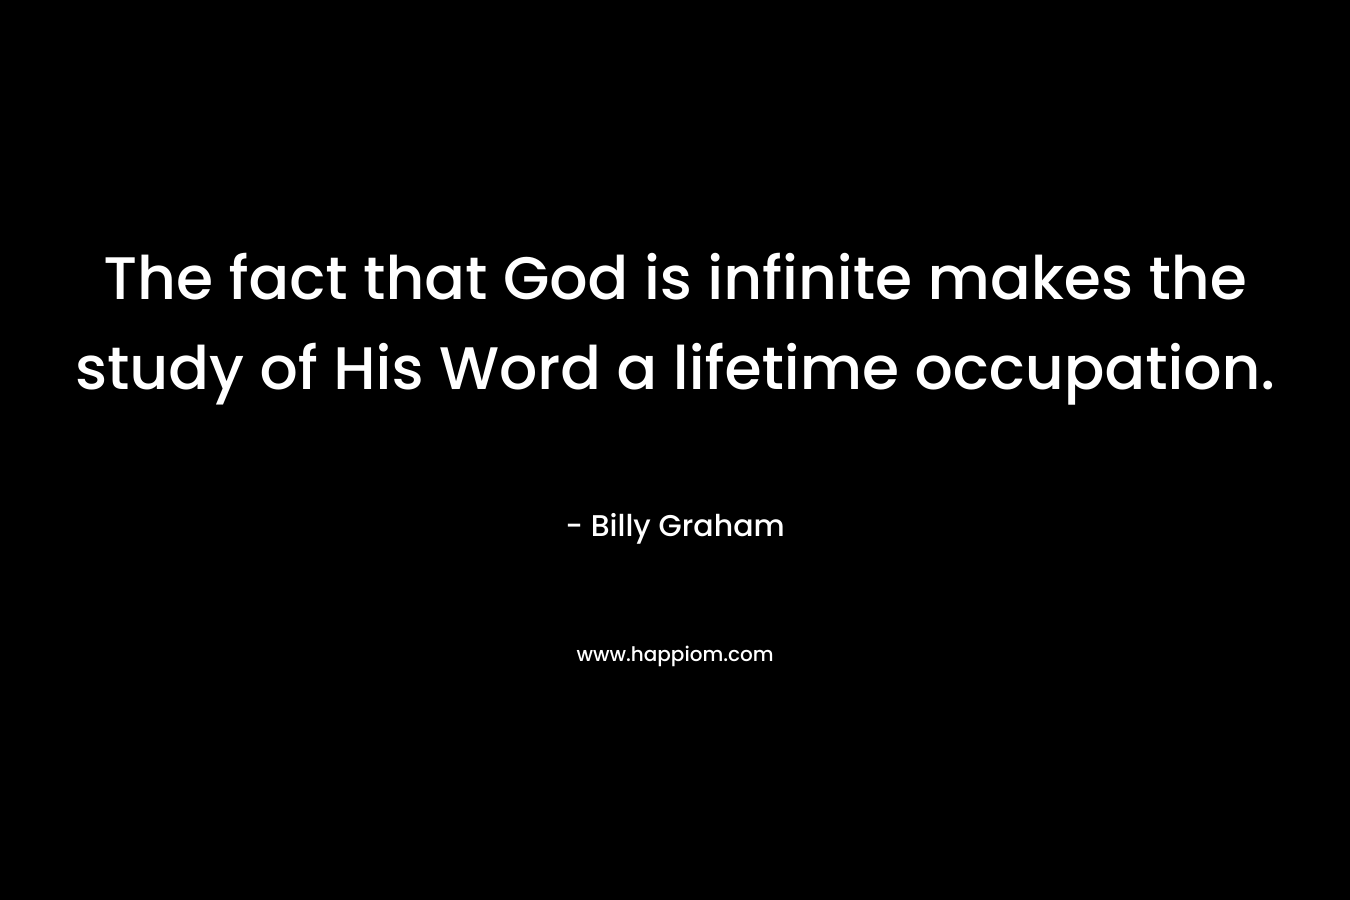 The fact that God is infinite makes the study of His Word a lifetime occupation.